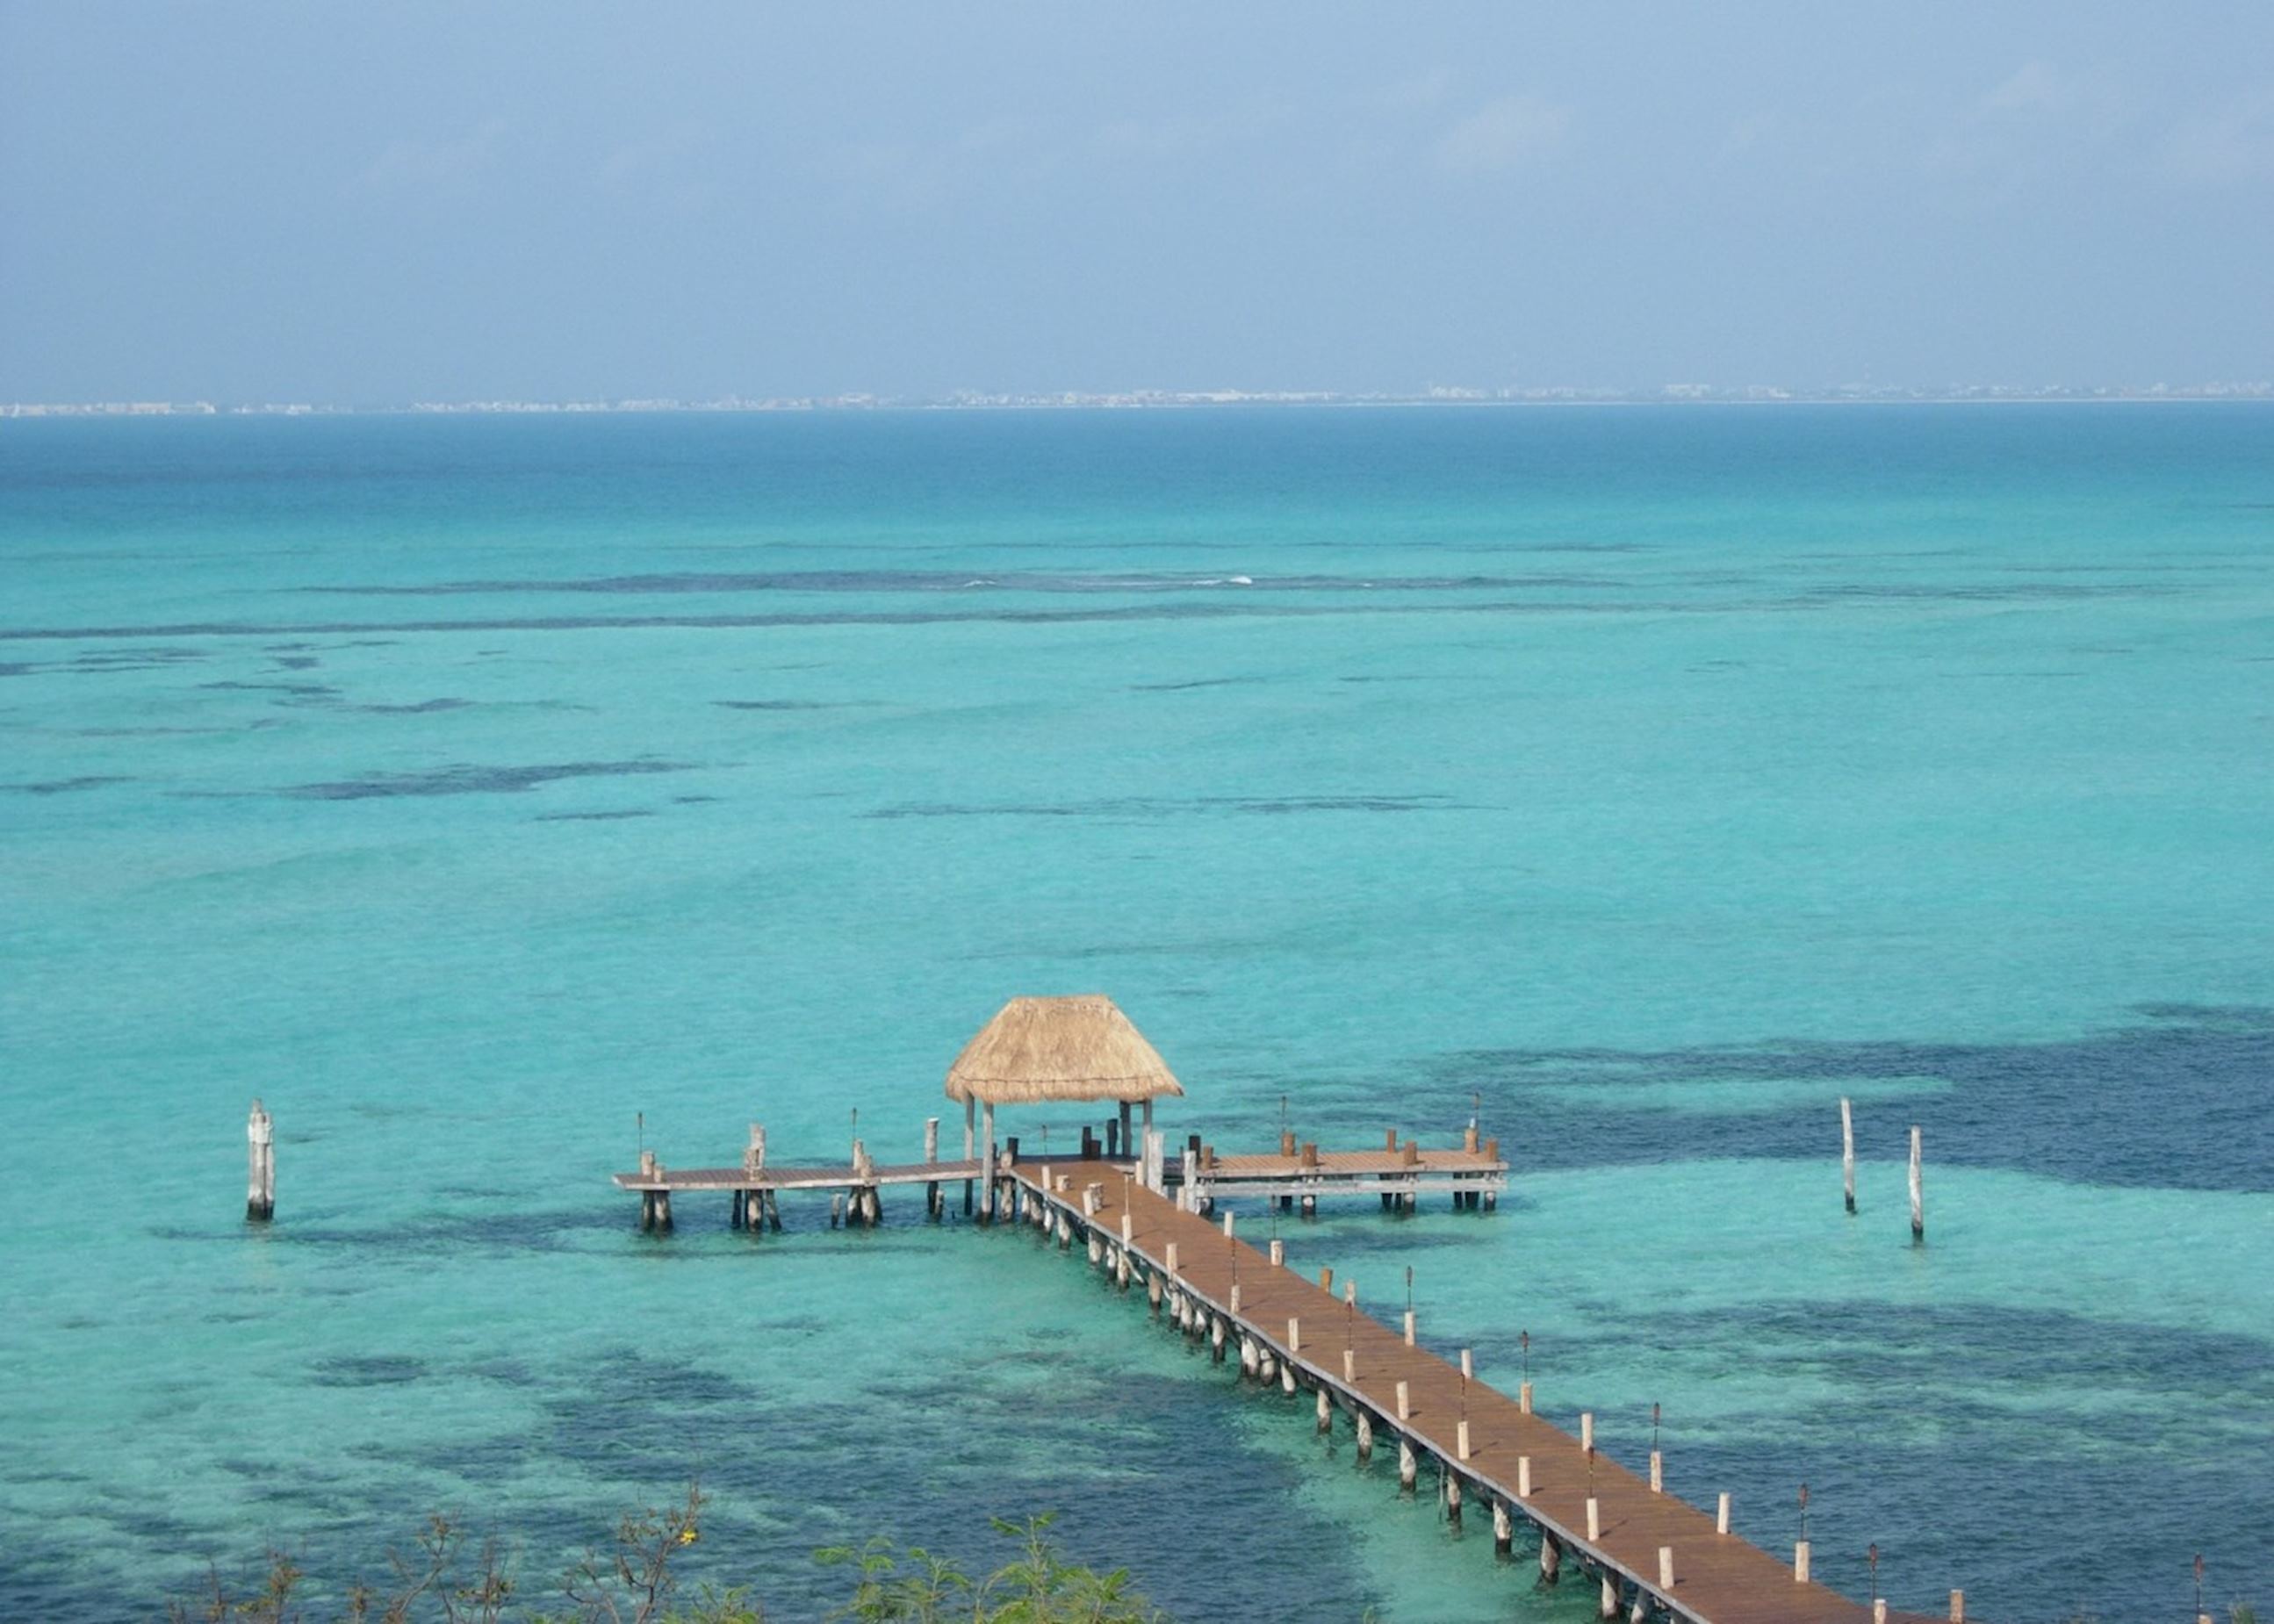 Visit Isla Mujeres on a trip to Mexico | Audley Travel